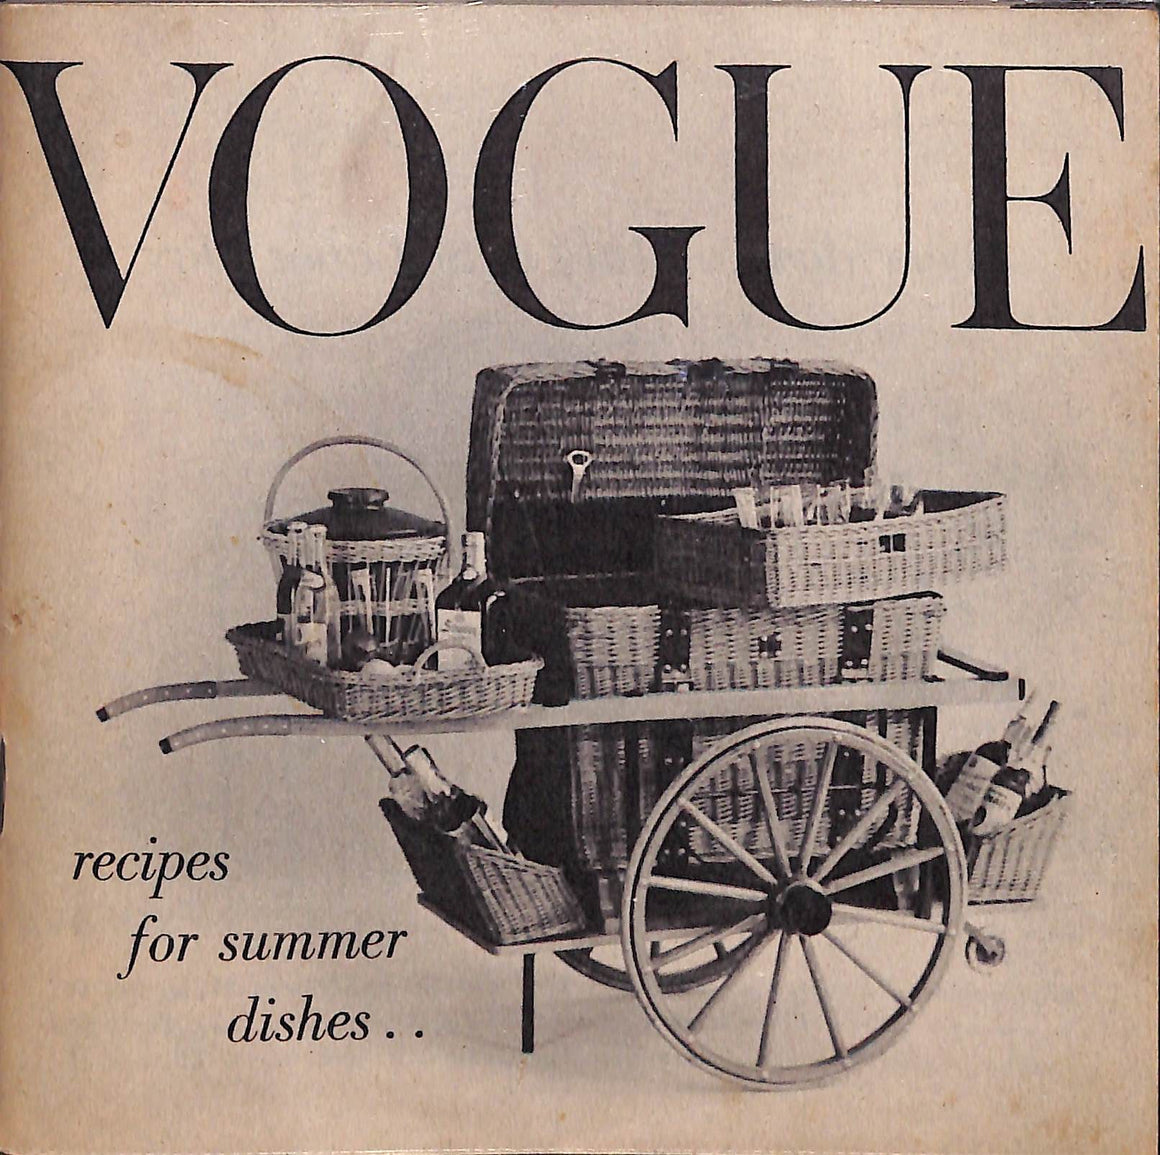 "Vogue: Recipes for Summer Dishes"